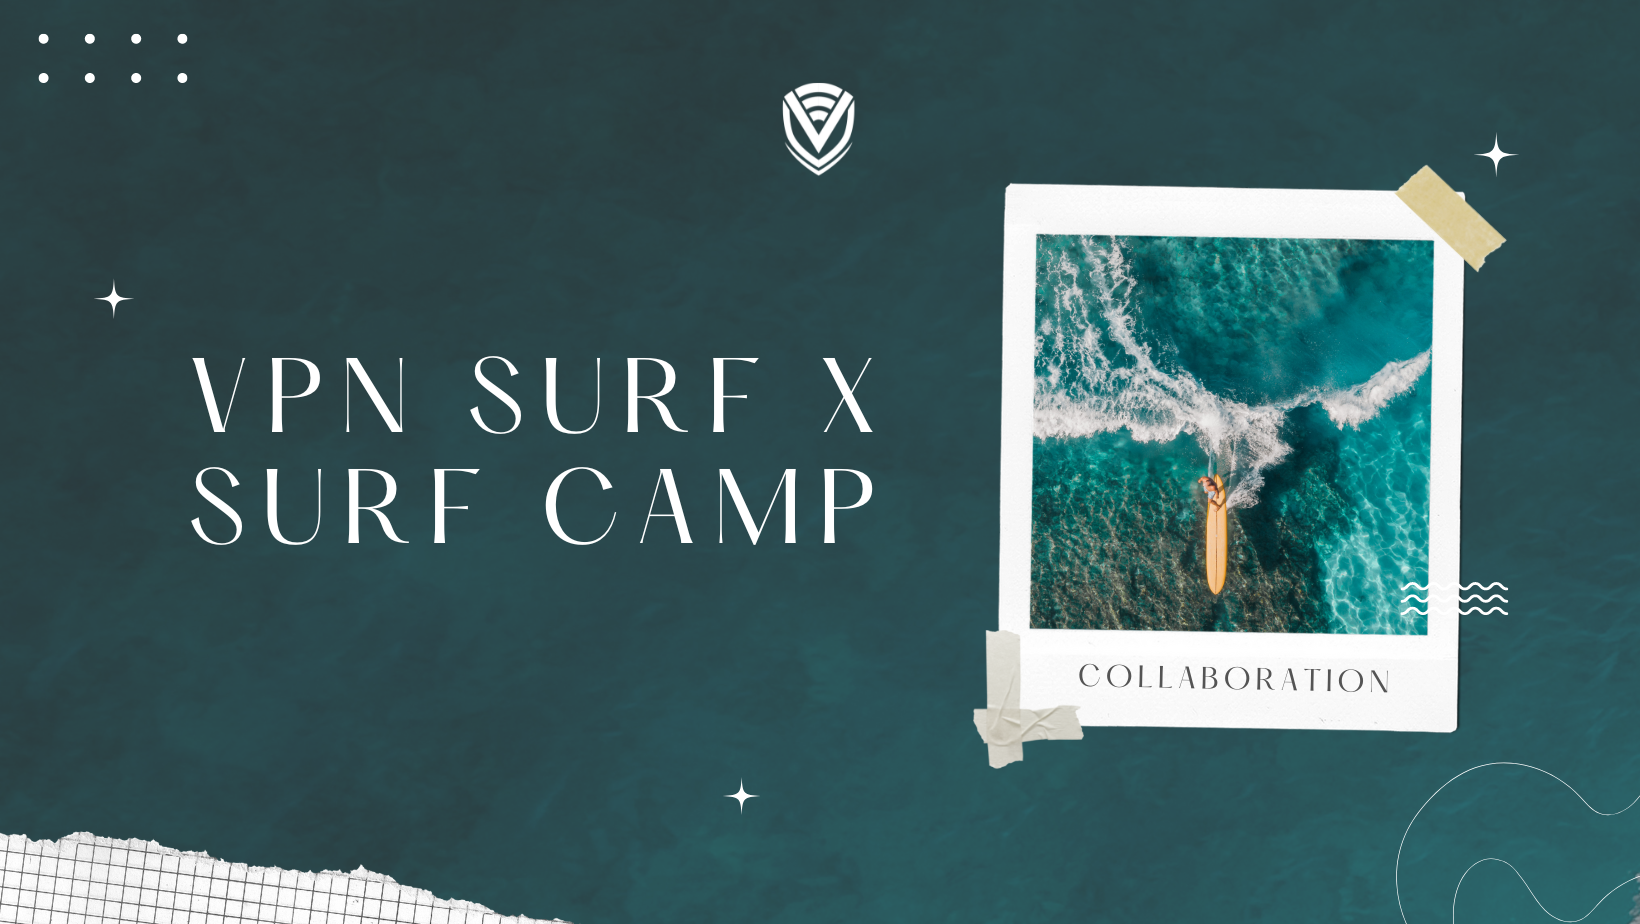 Collaboration between VPN Surf and Surf Camp